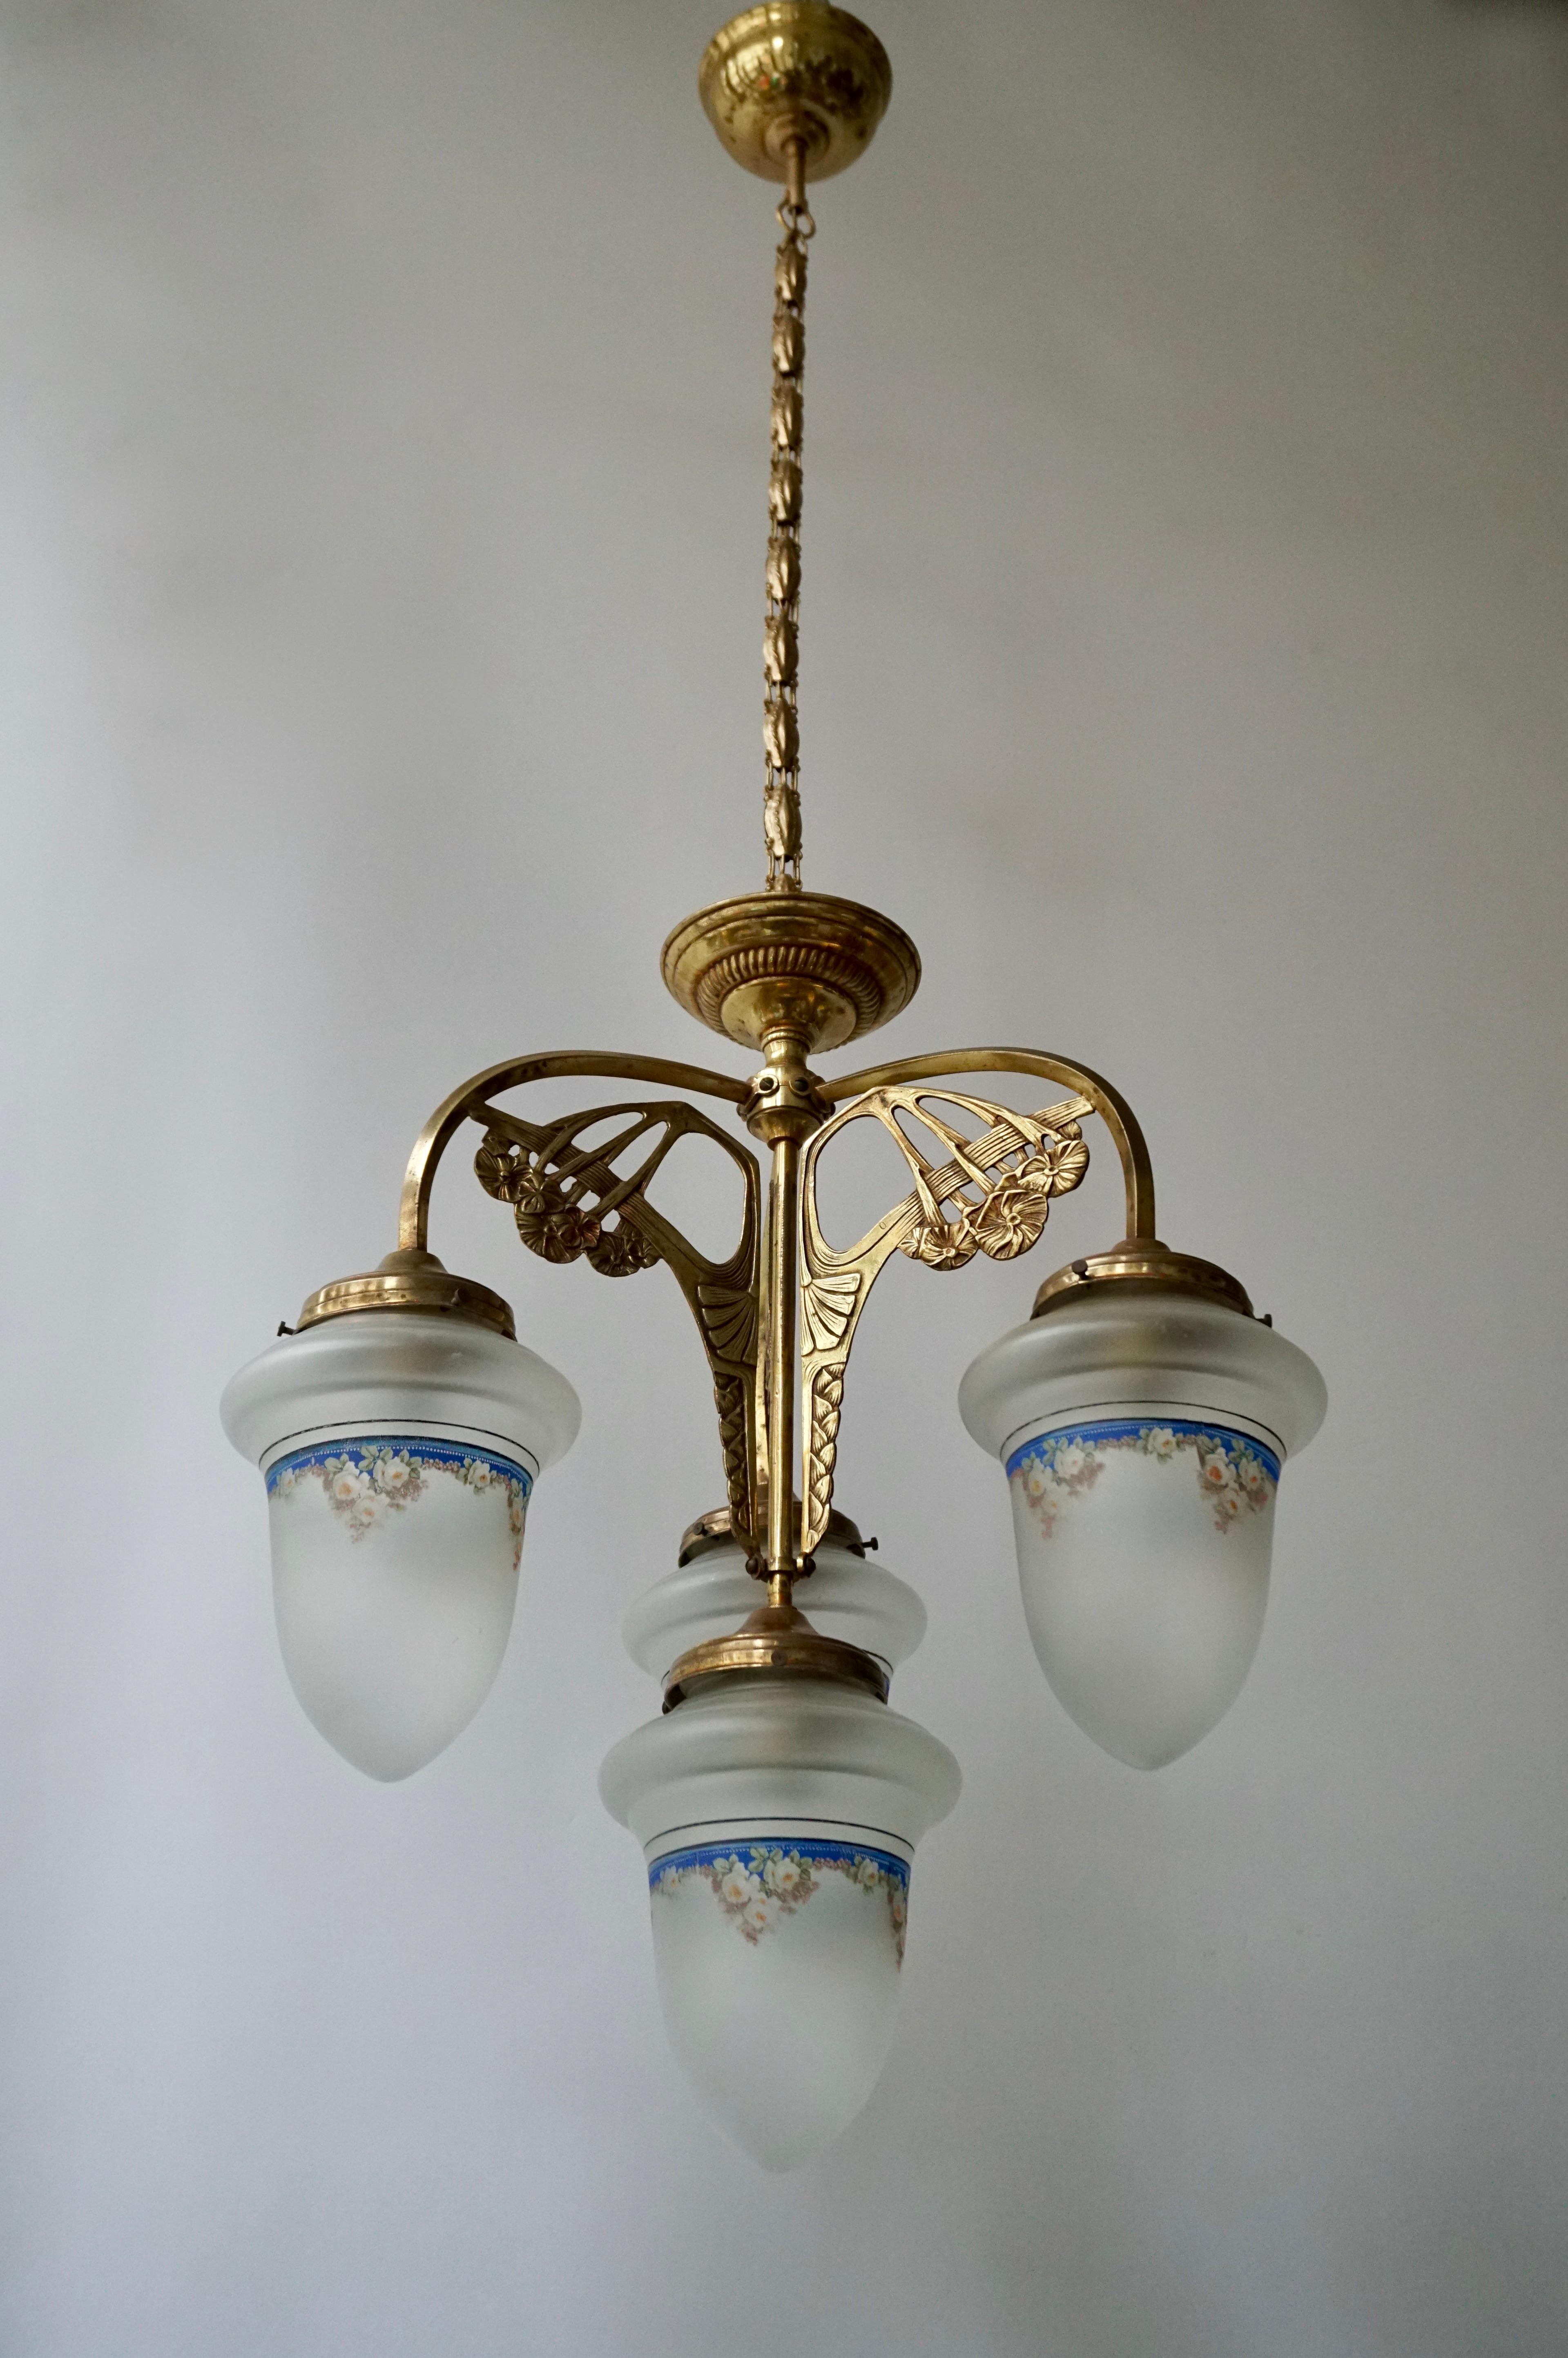 Elegant Italian brass Art Nouveau chandelier with four painted glass shades.
Measures: Diameter40 cm.
Height fixture 50 cm.
Total height including chain 110 cm.